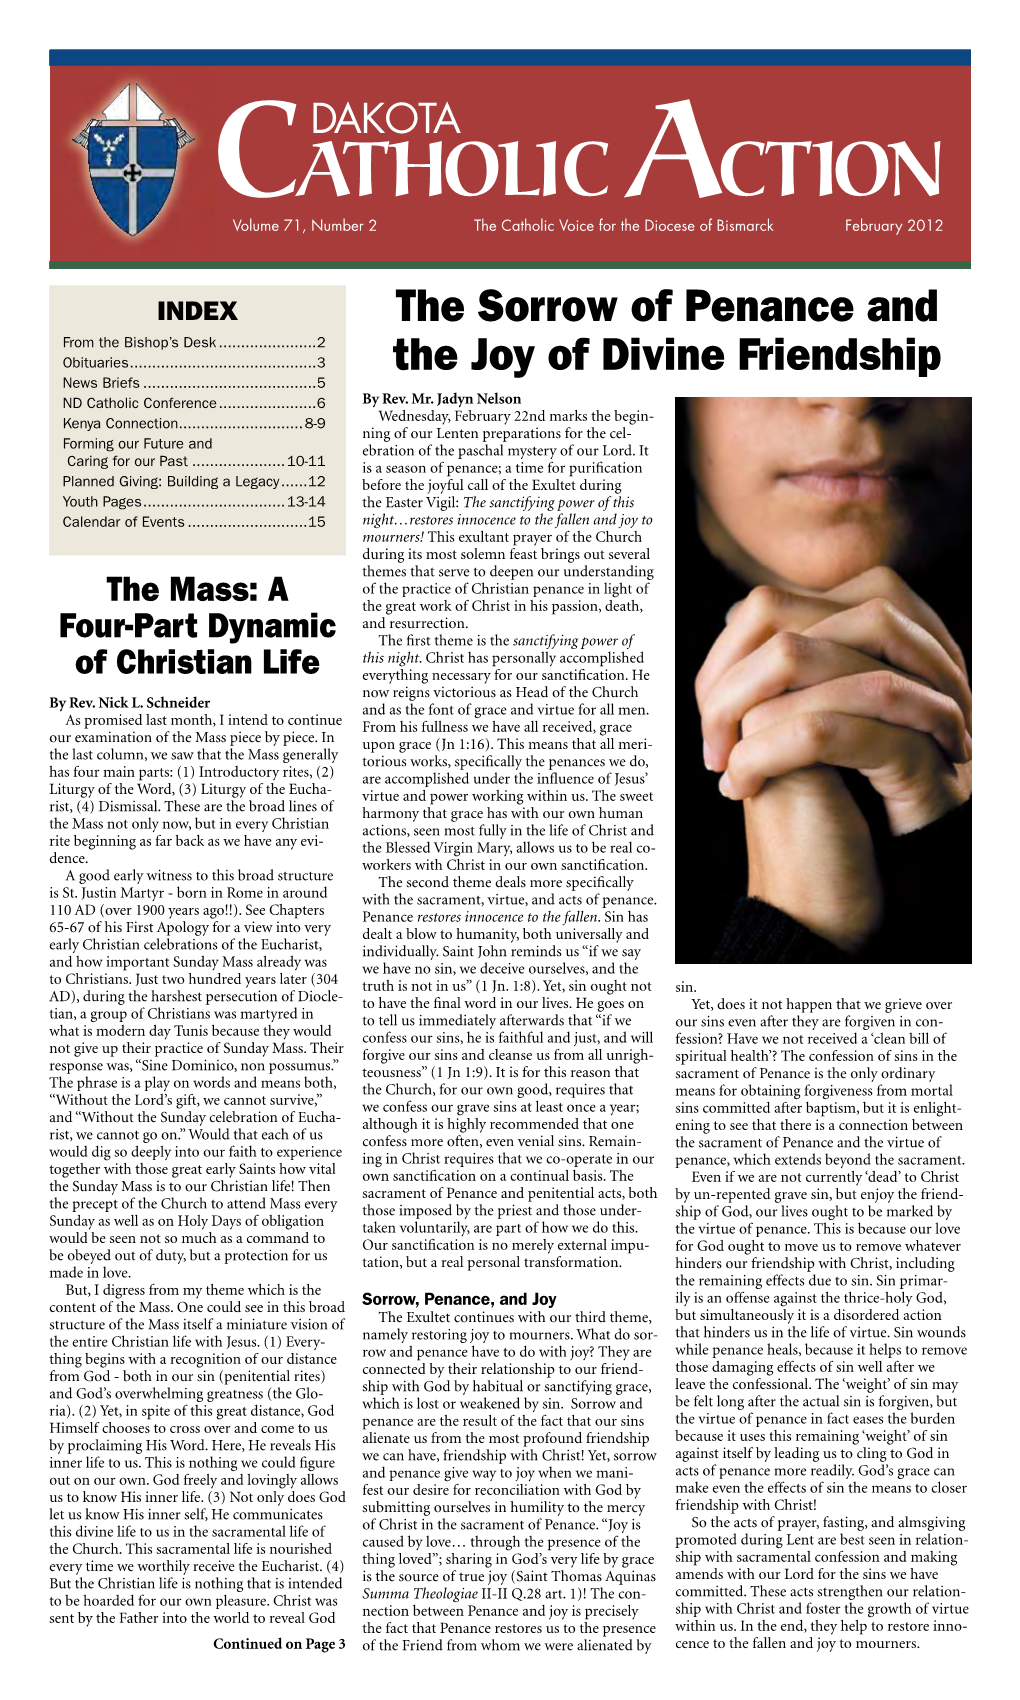 CATHOLIC ACTION Volume 71, Number 2 the Catholic Voice for the Diocese of Bismarck February 2012